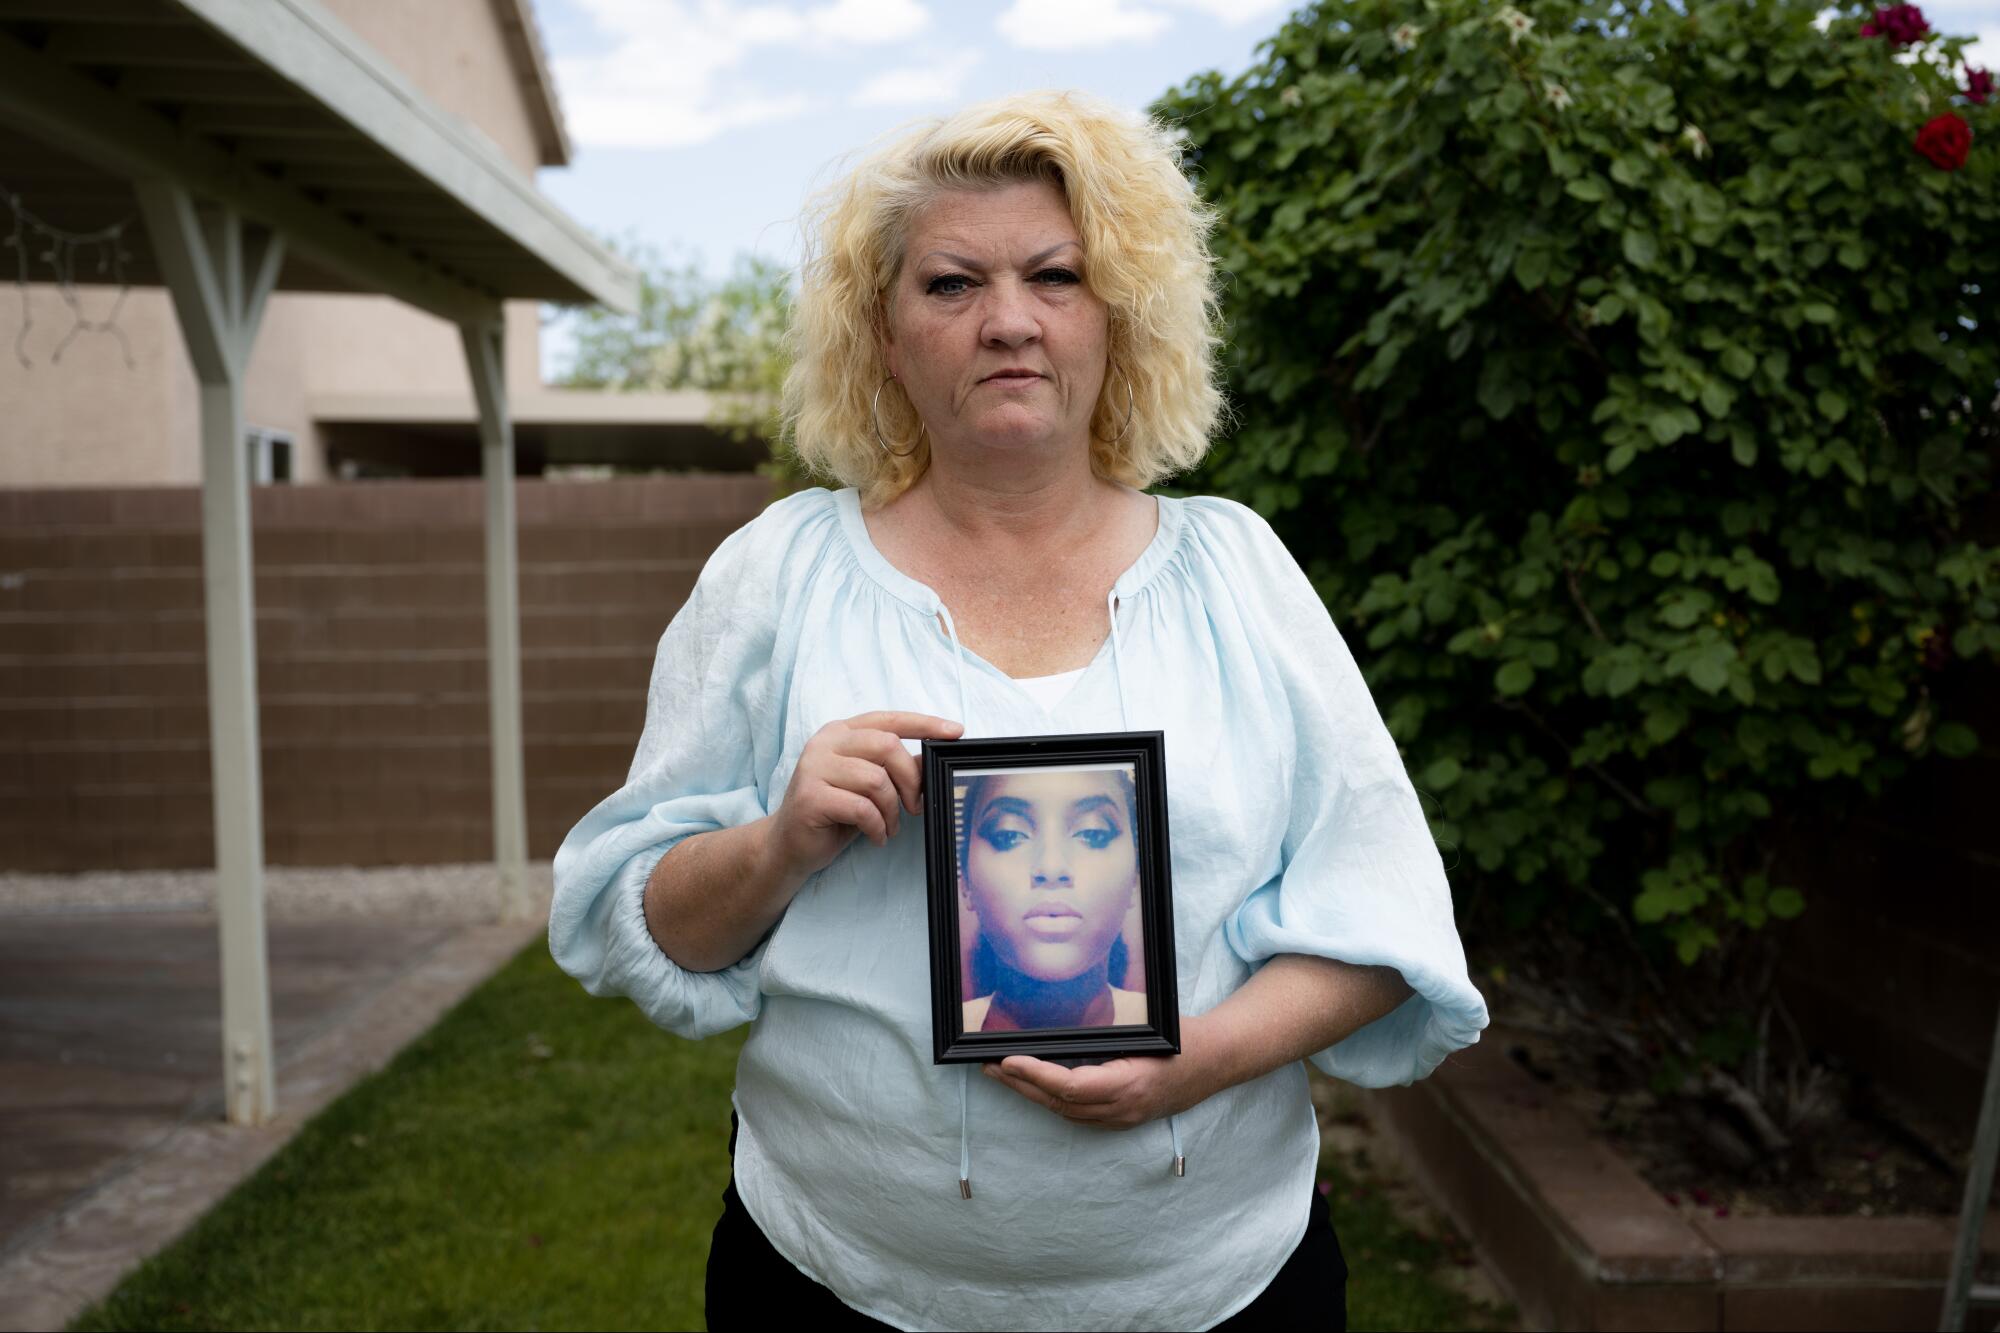 A woman in the backyard of a home holds a photgraph.